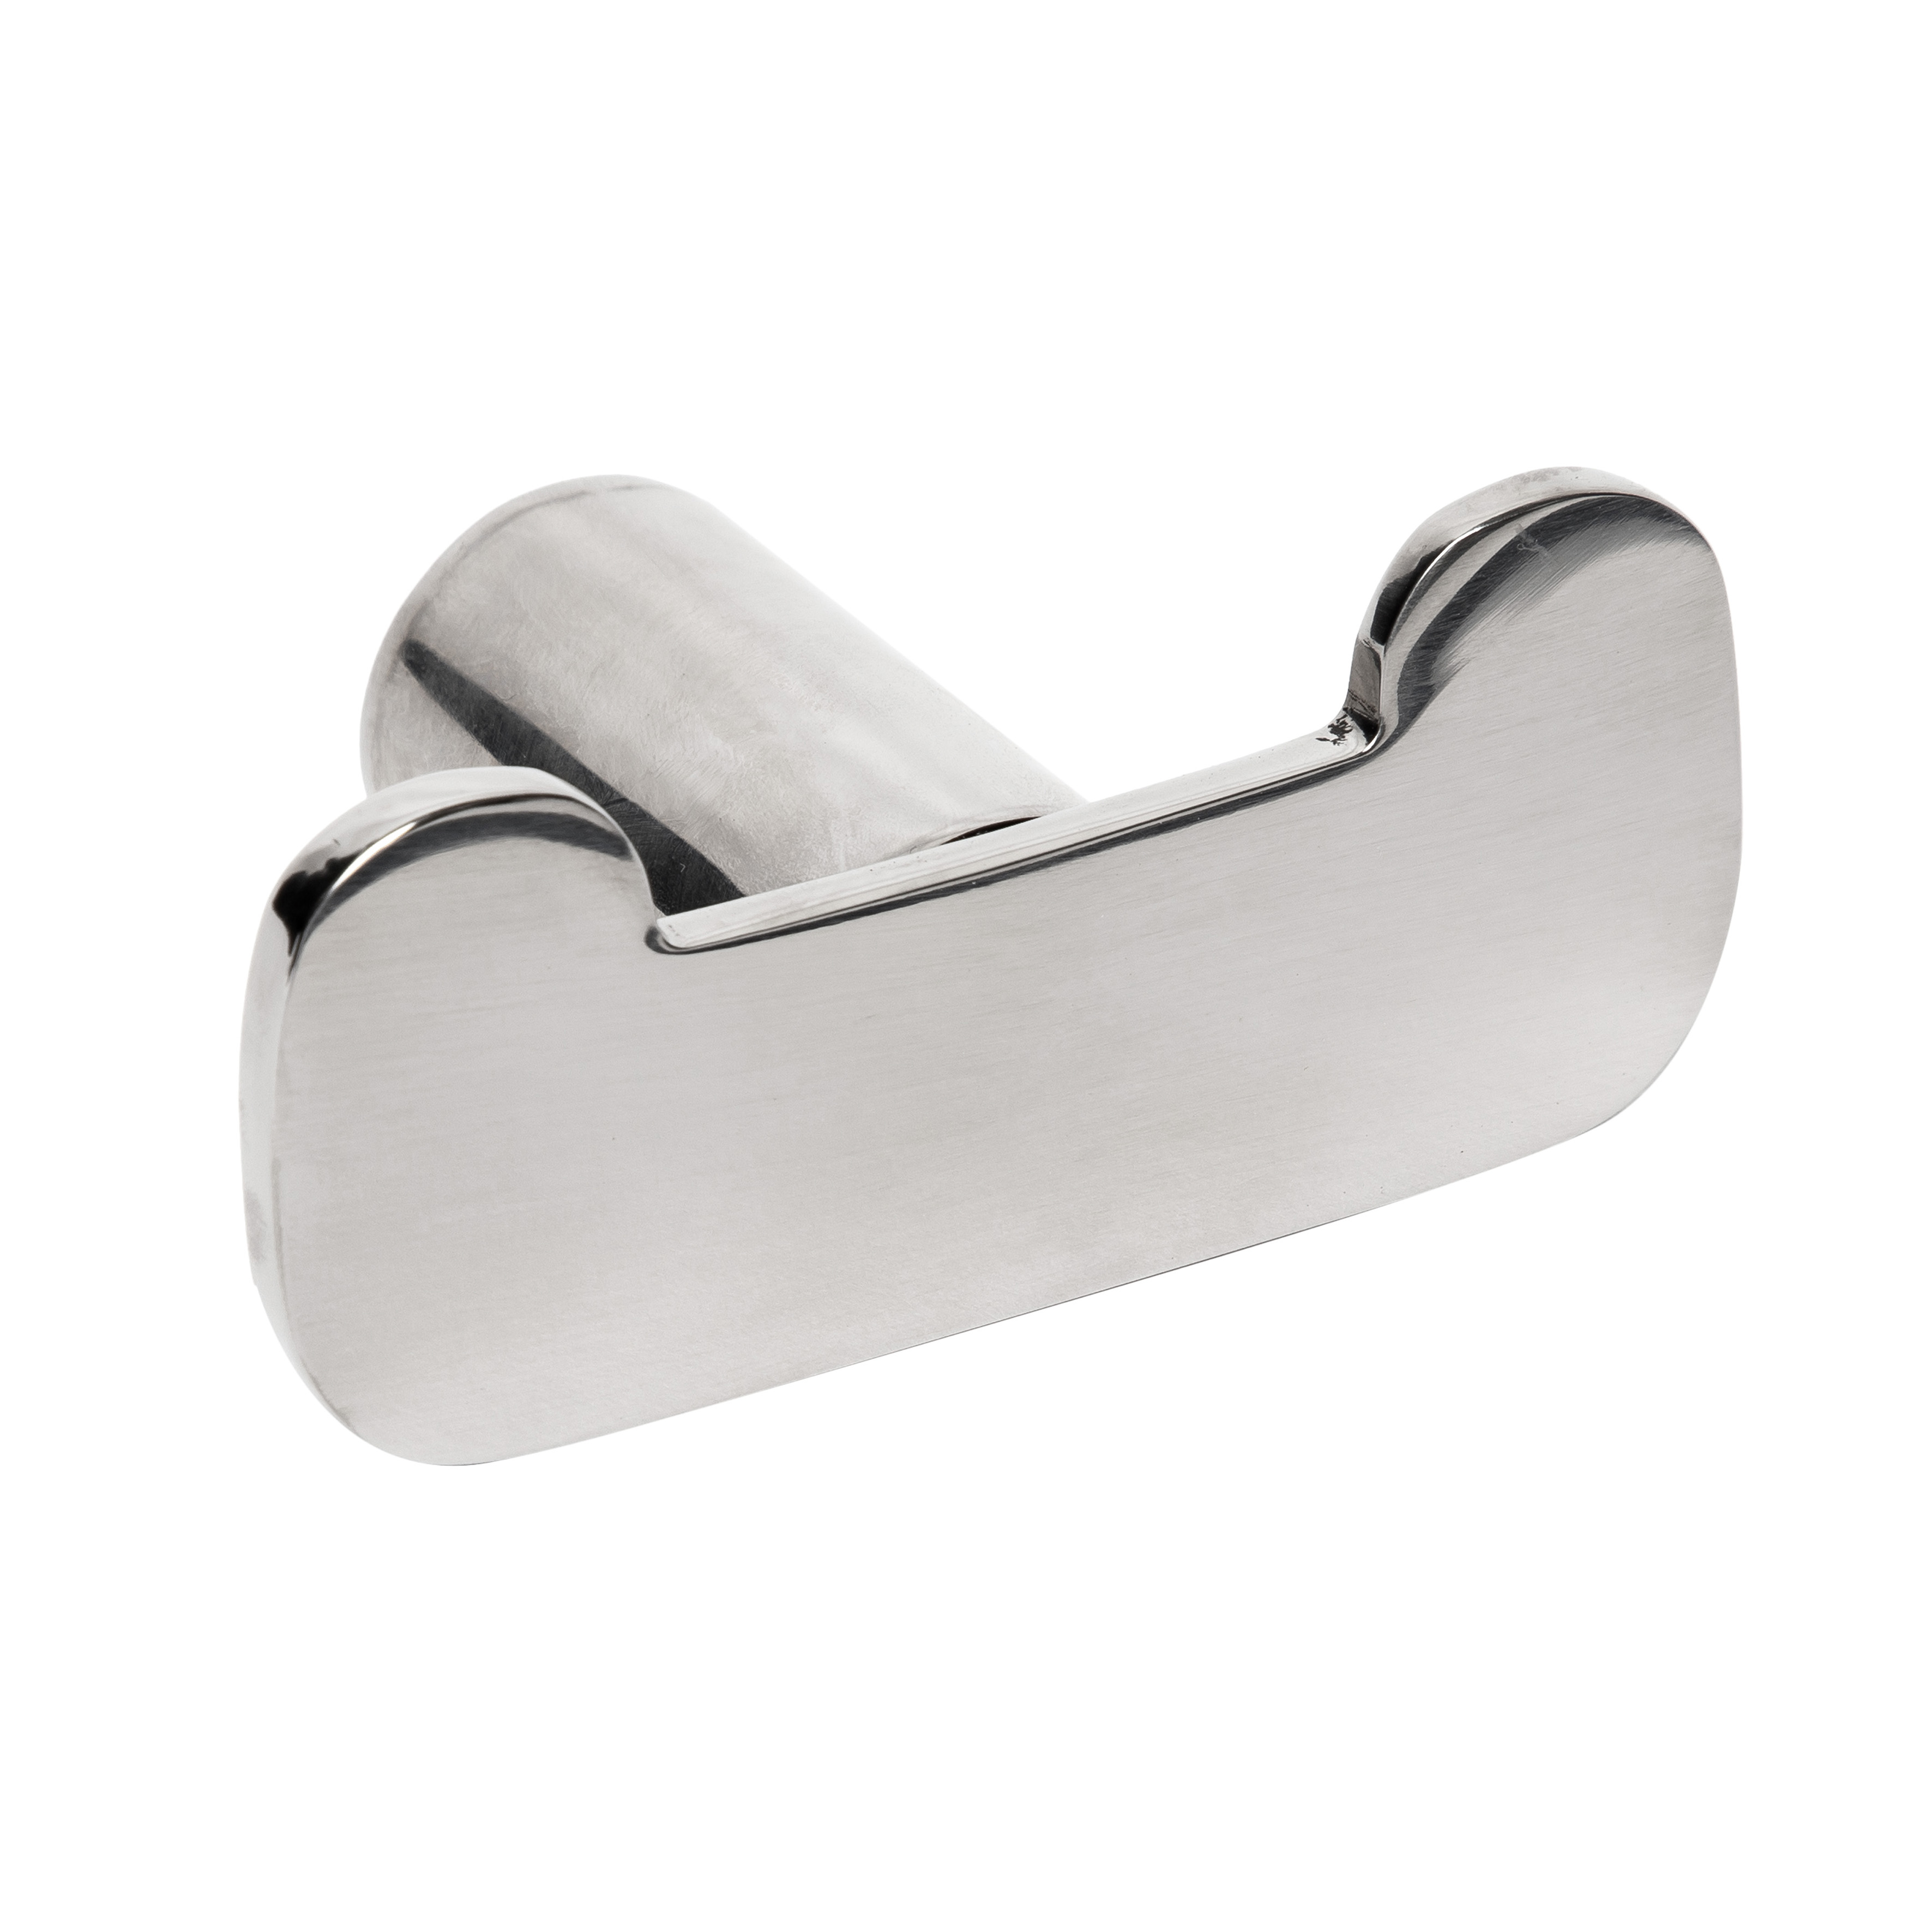 Double bathroom robe hook made of stainless steel, bright finish